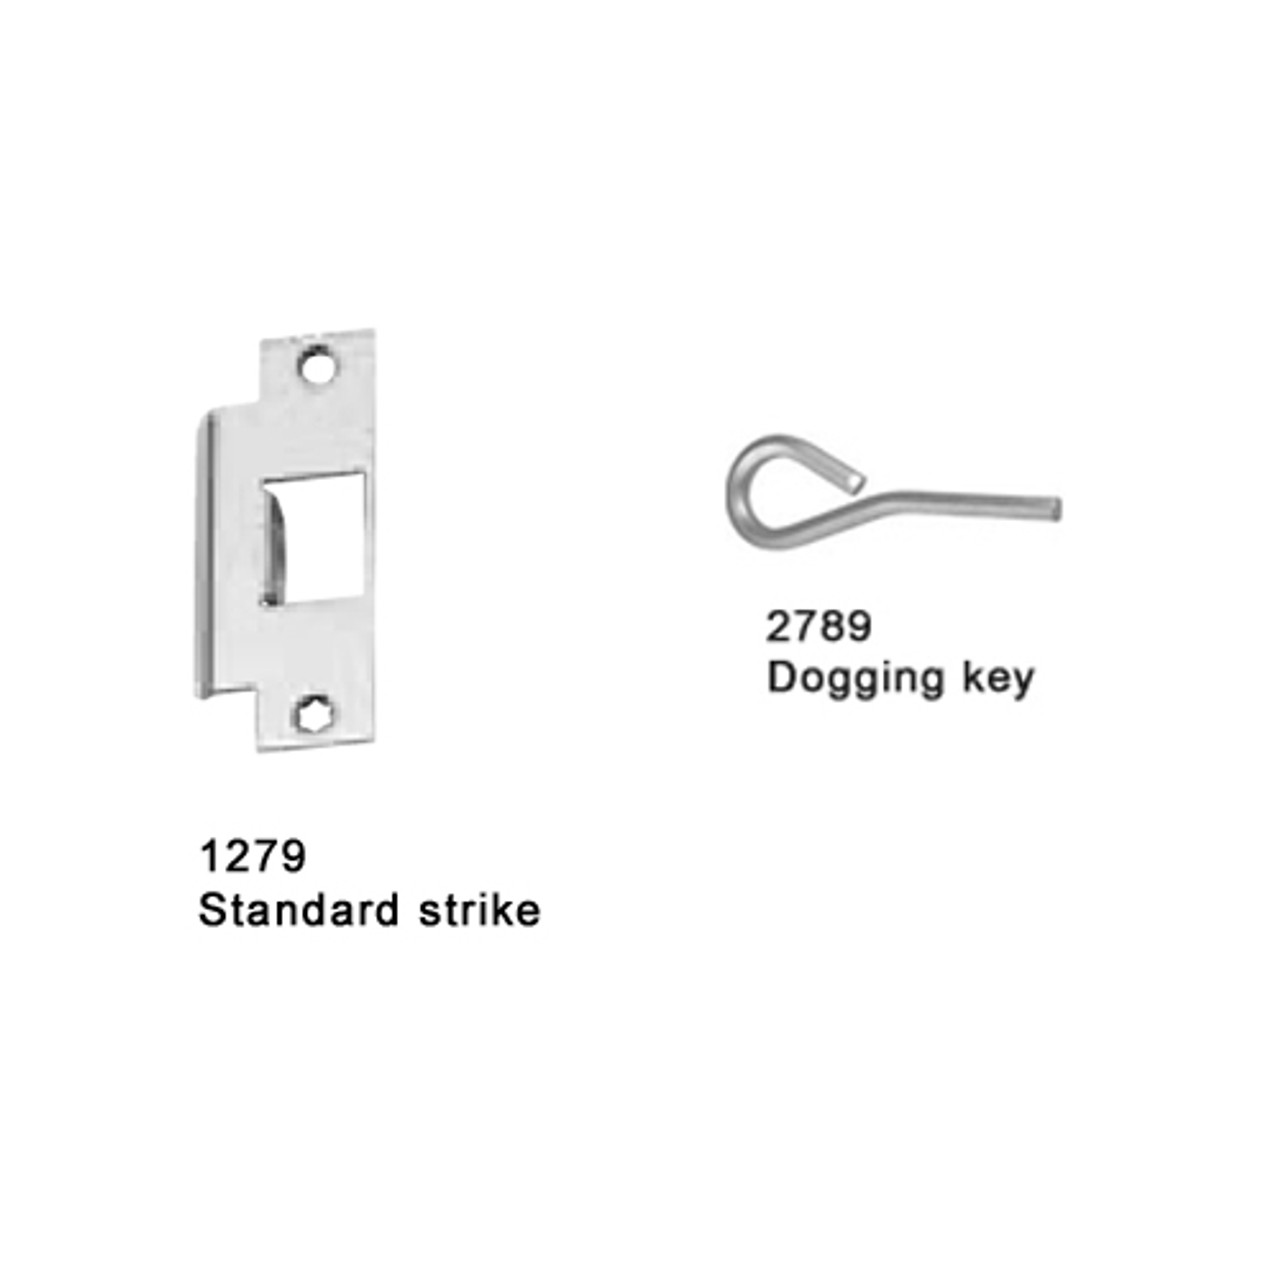 25-M-L-DT-DANE-US32D-3-RHR Falcon 25 Series Mortise Lock Devices 510L-DT Dane Lever Trim with Dummy Trim in Satin Stainless Steel